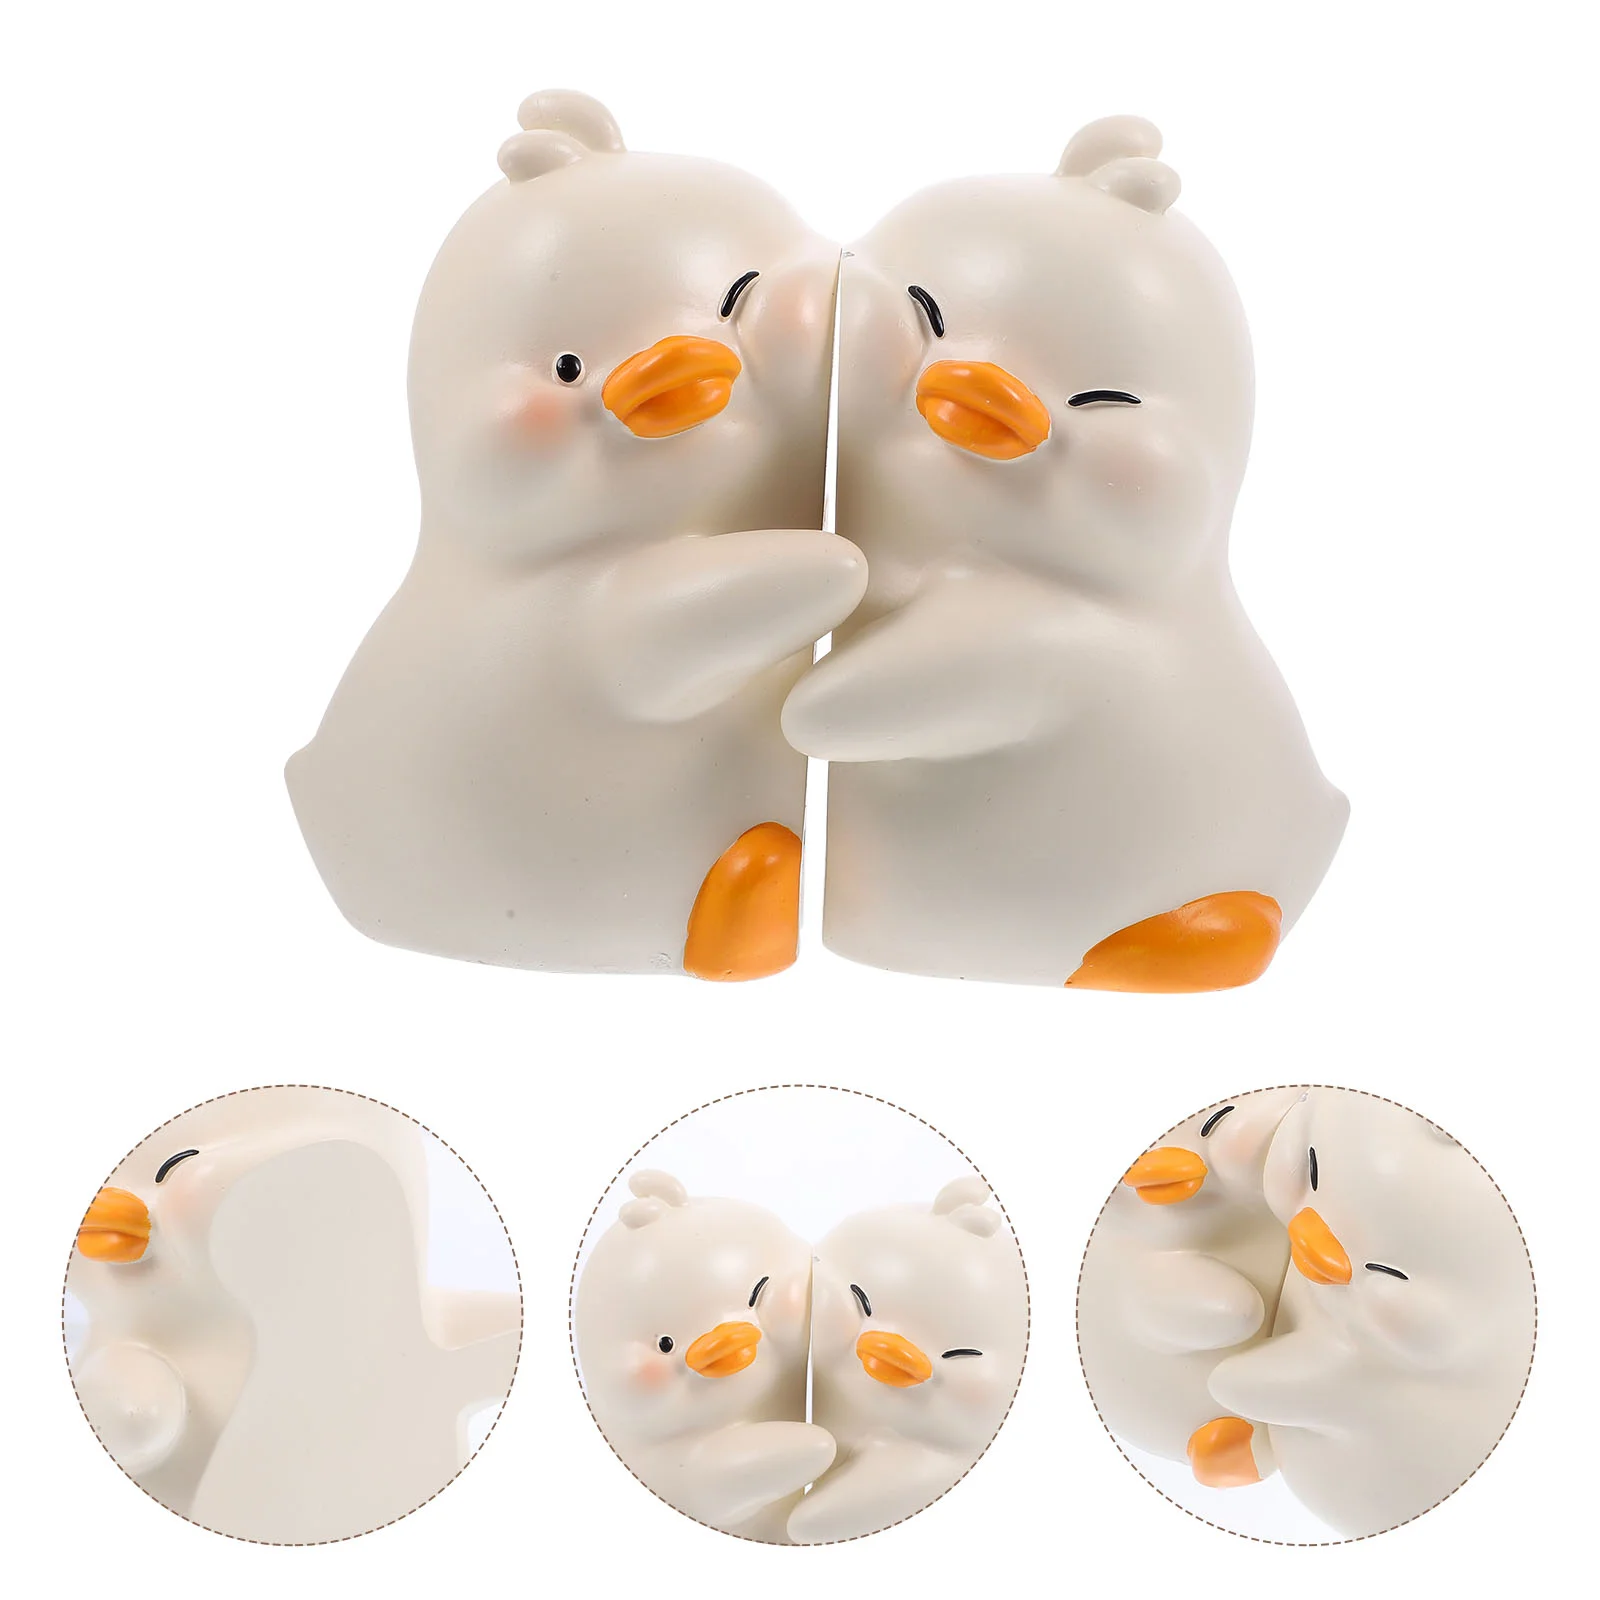 1 Pair Cute Hug Ducks Decorative Bookend Resin Book Holder Stopper for Home Office Desk 1pc decorative bookend stand tealight holder resin book support stopper for book shelf cabinet home office gifts white